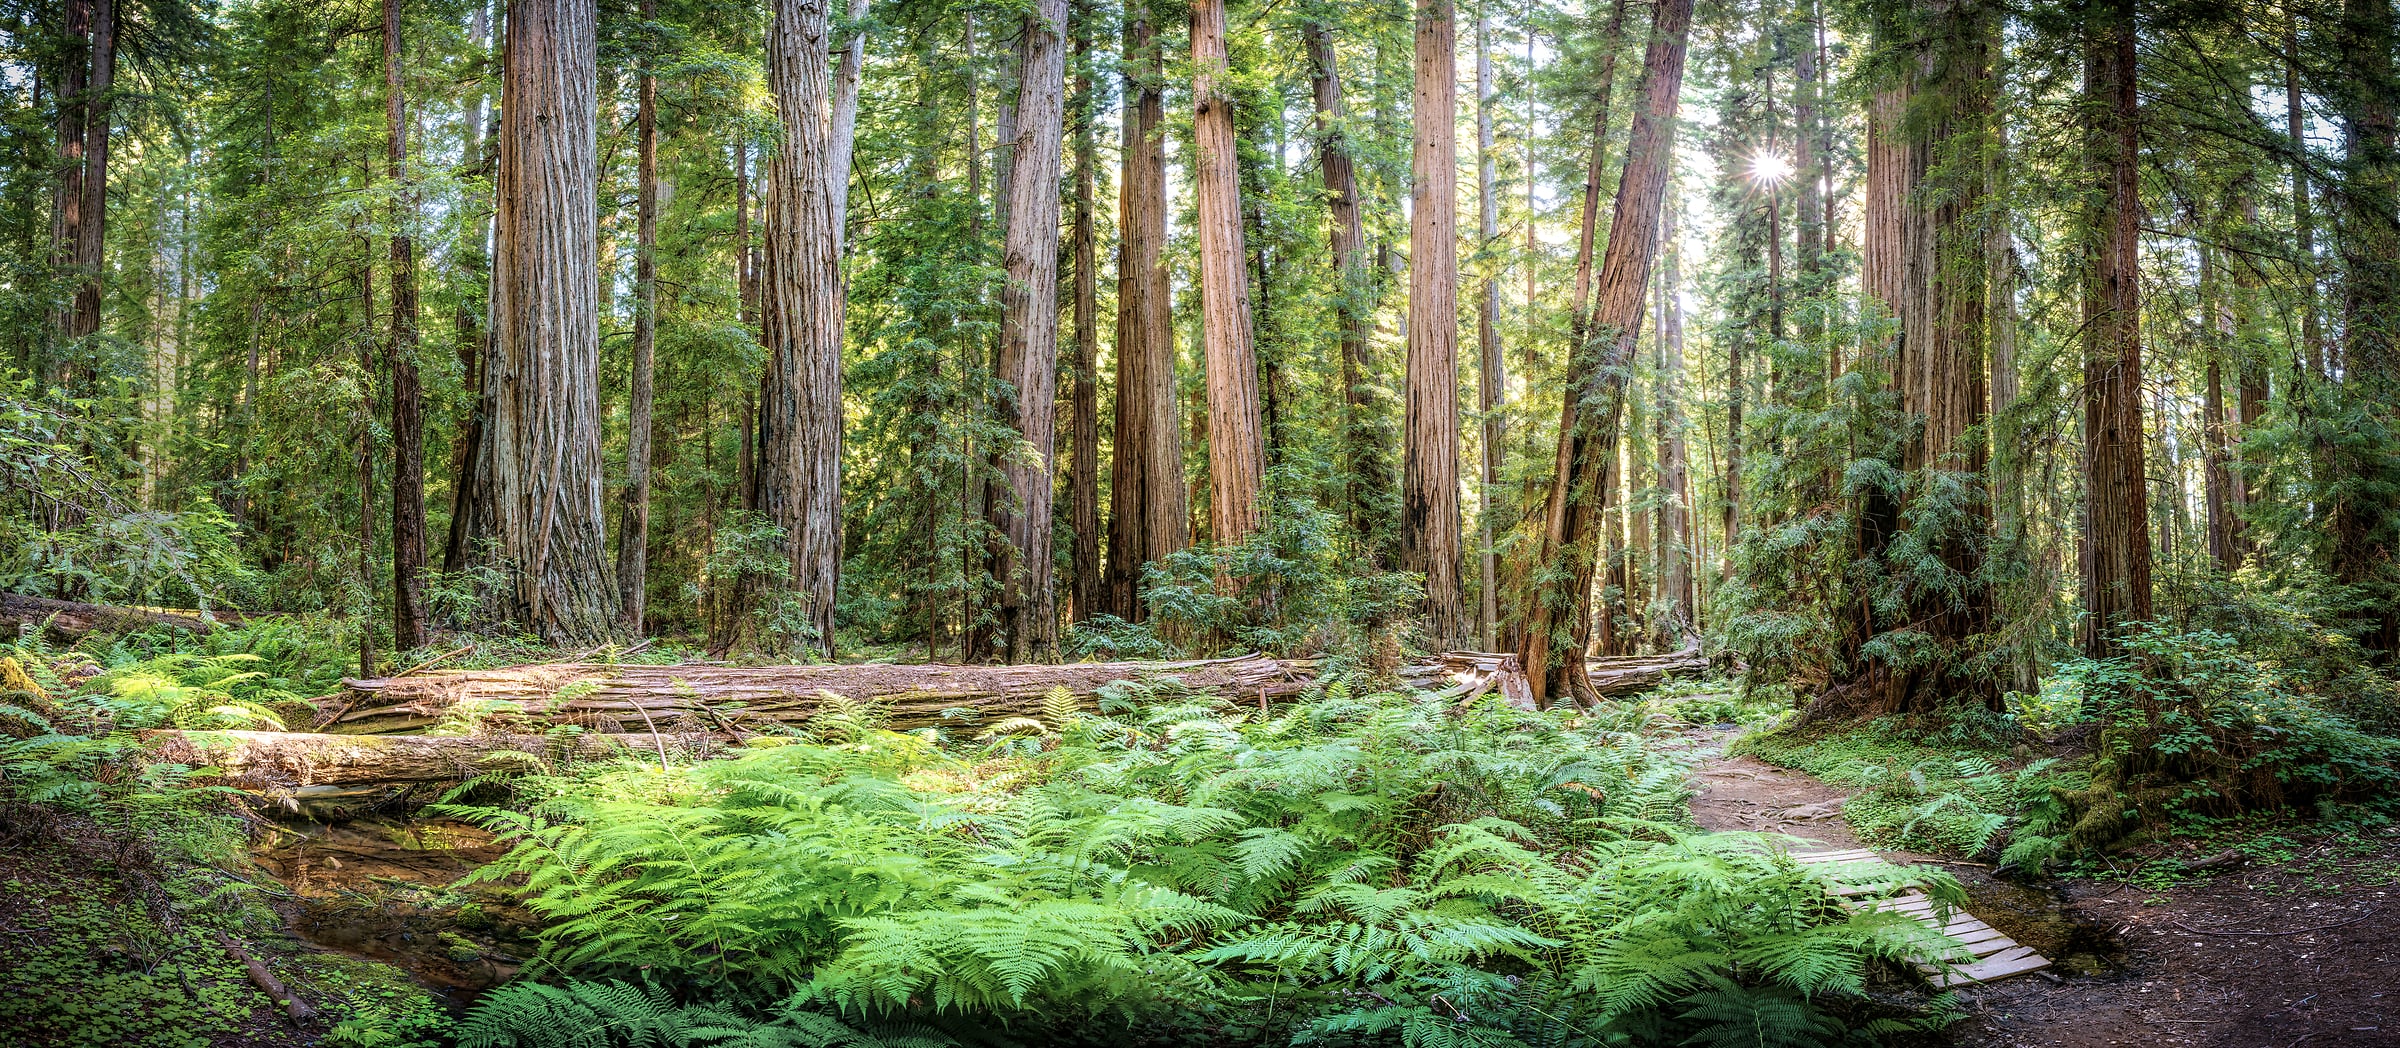 536 megapixels! A very high resolution, large-format VAST photo of a redwood forest with ferns and a creek; fine art nature photo created by Justin Katz in Montgomery Woods State Reserve, California